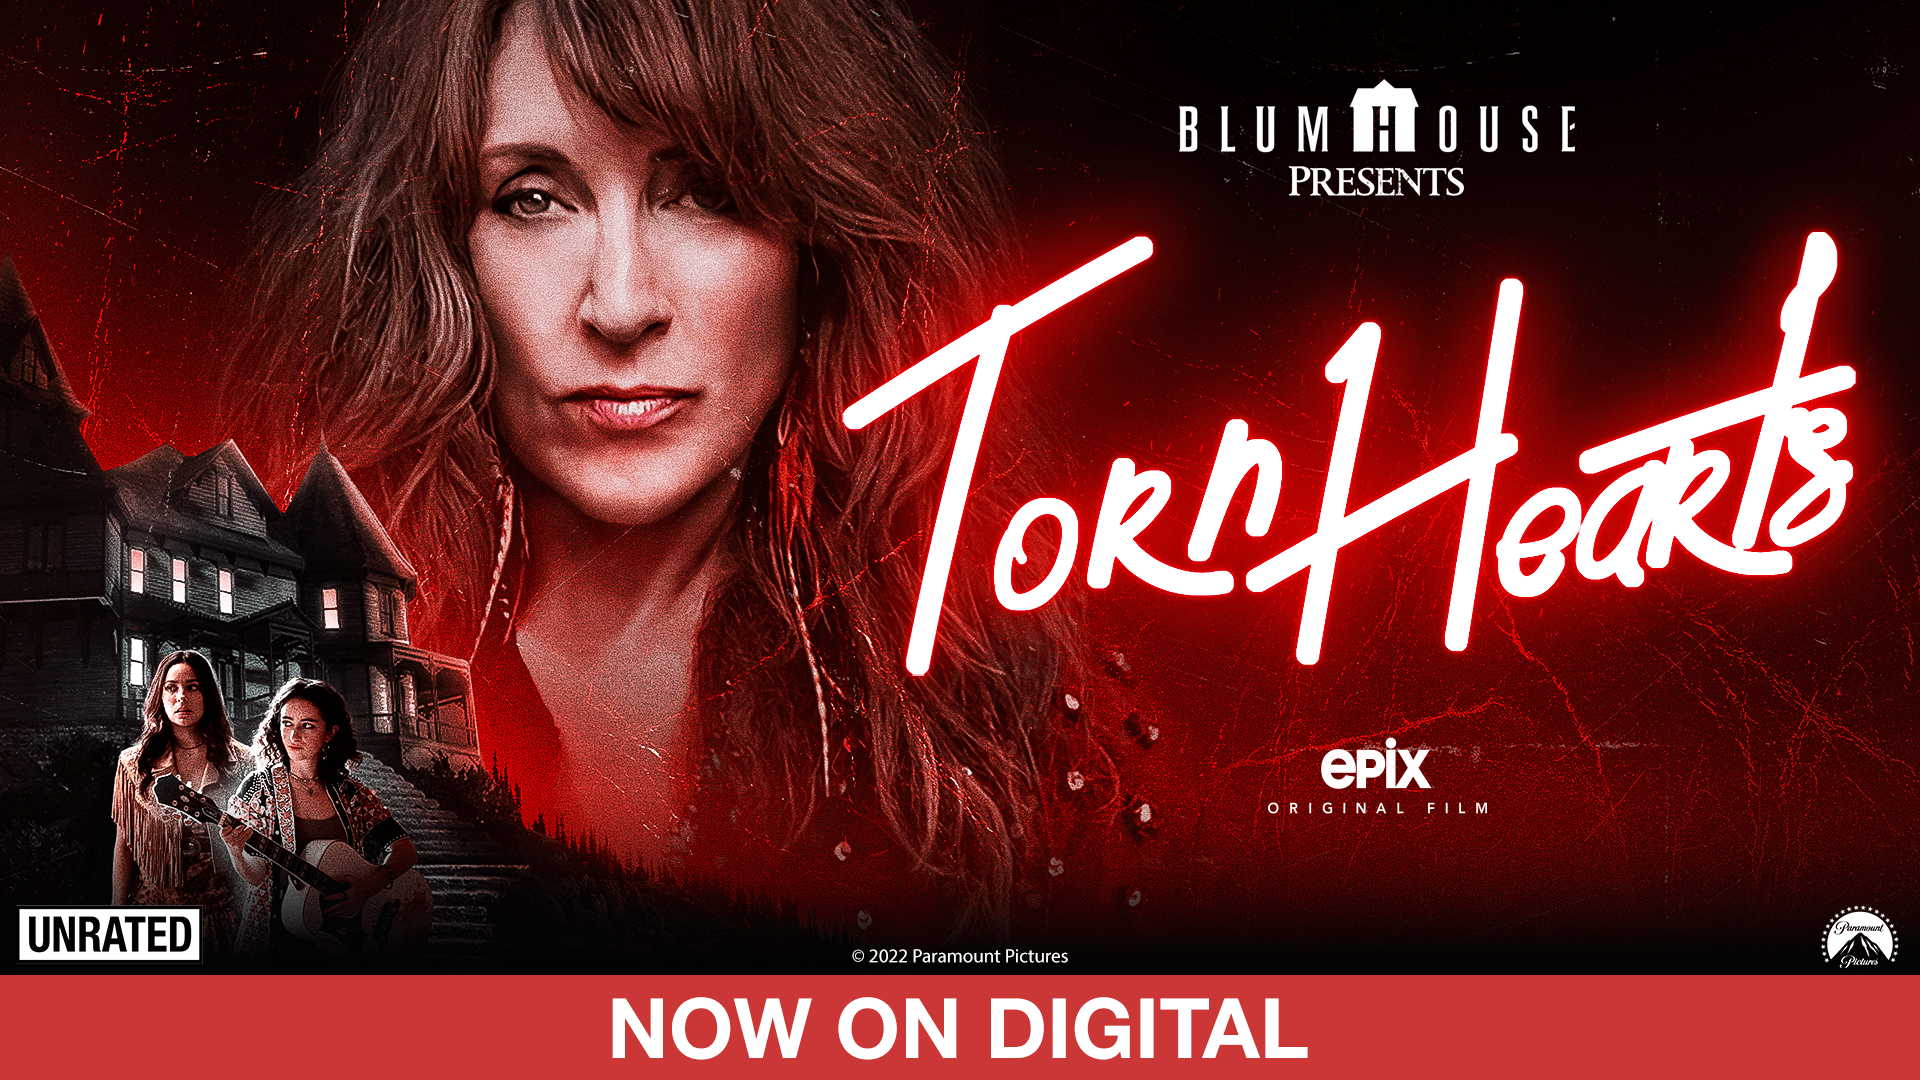 Enter to win a digital code to see Torn Hearts starring Katey Sagal! |  KABC-AM